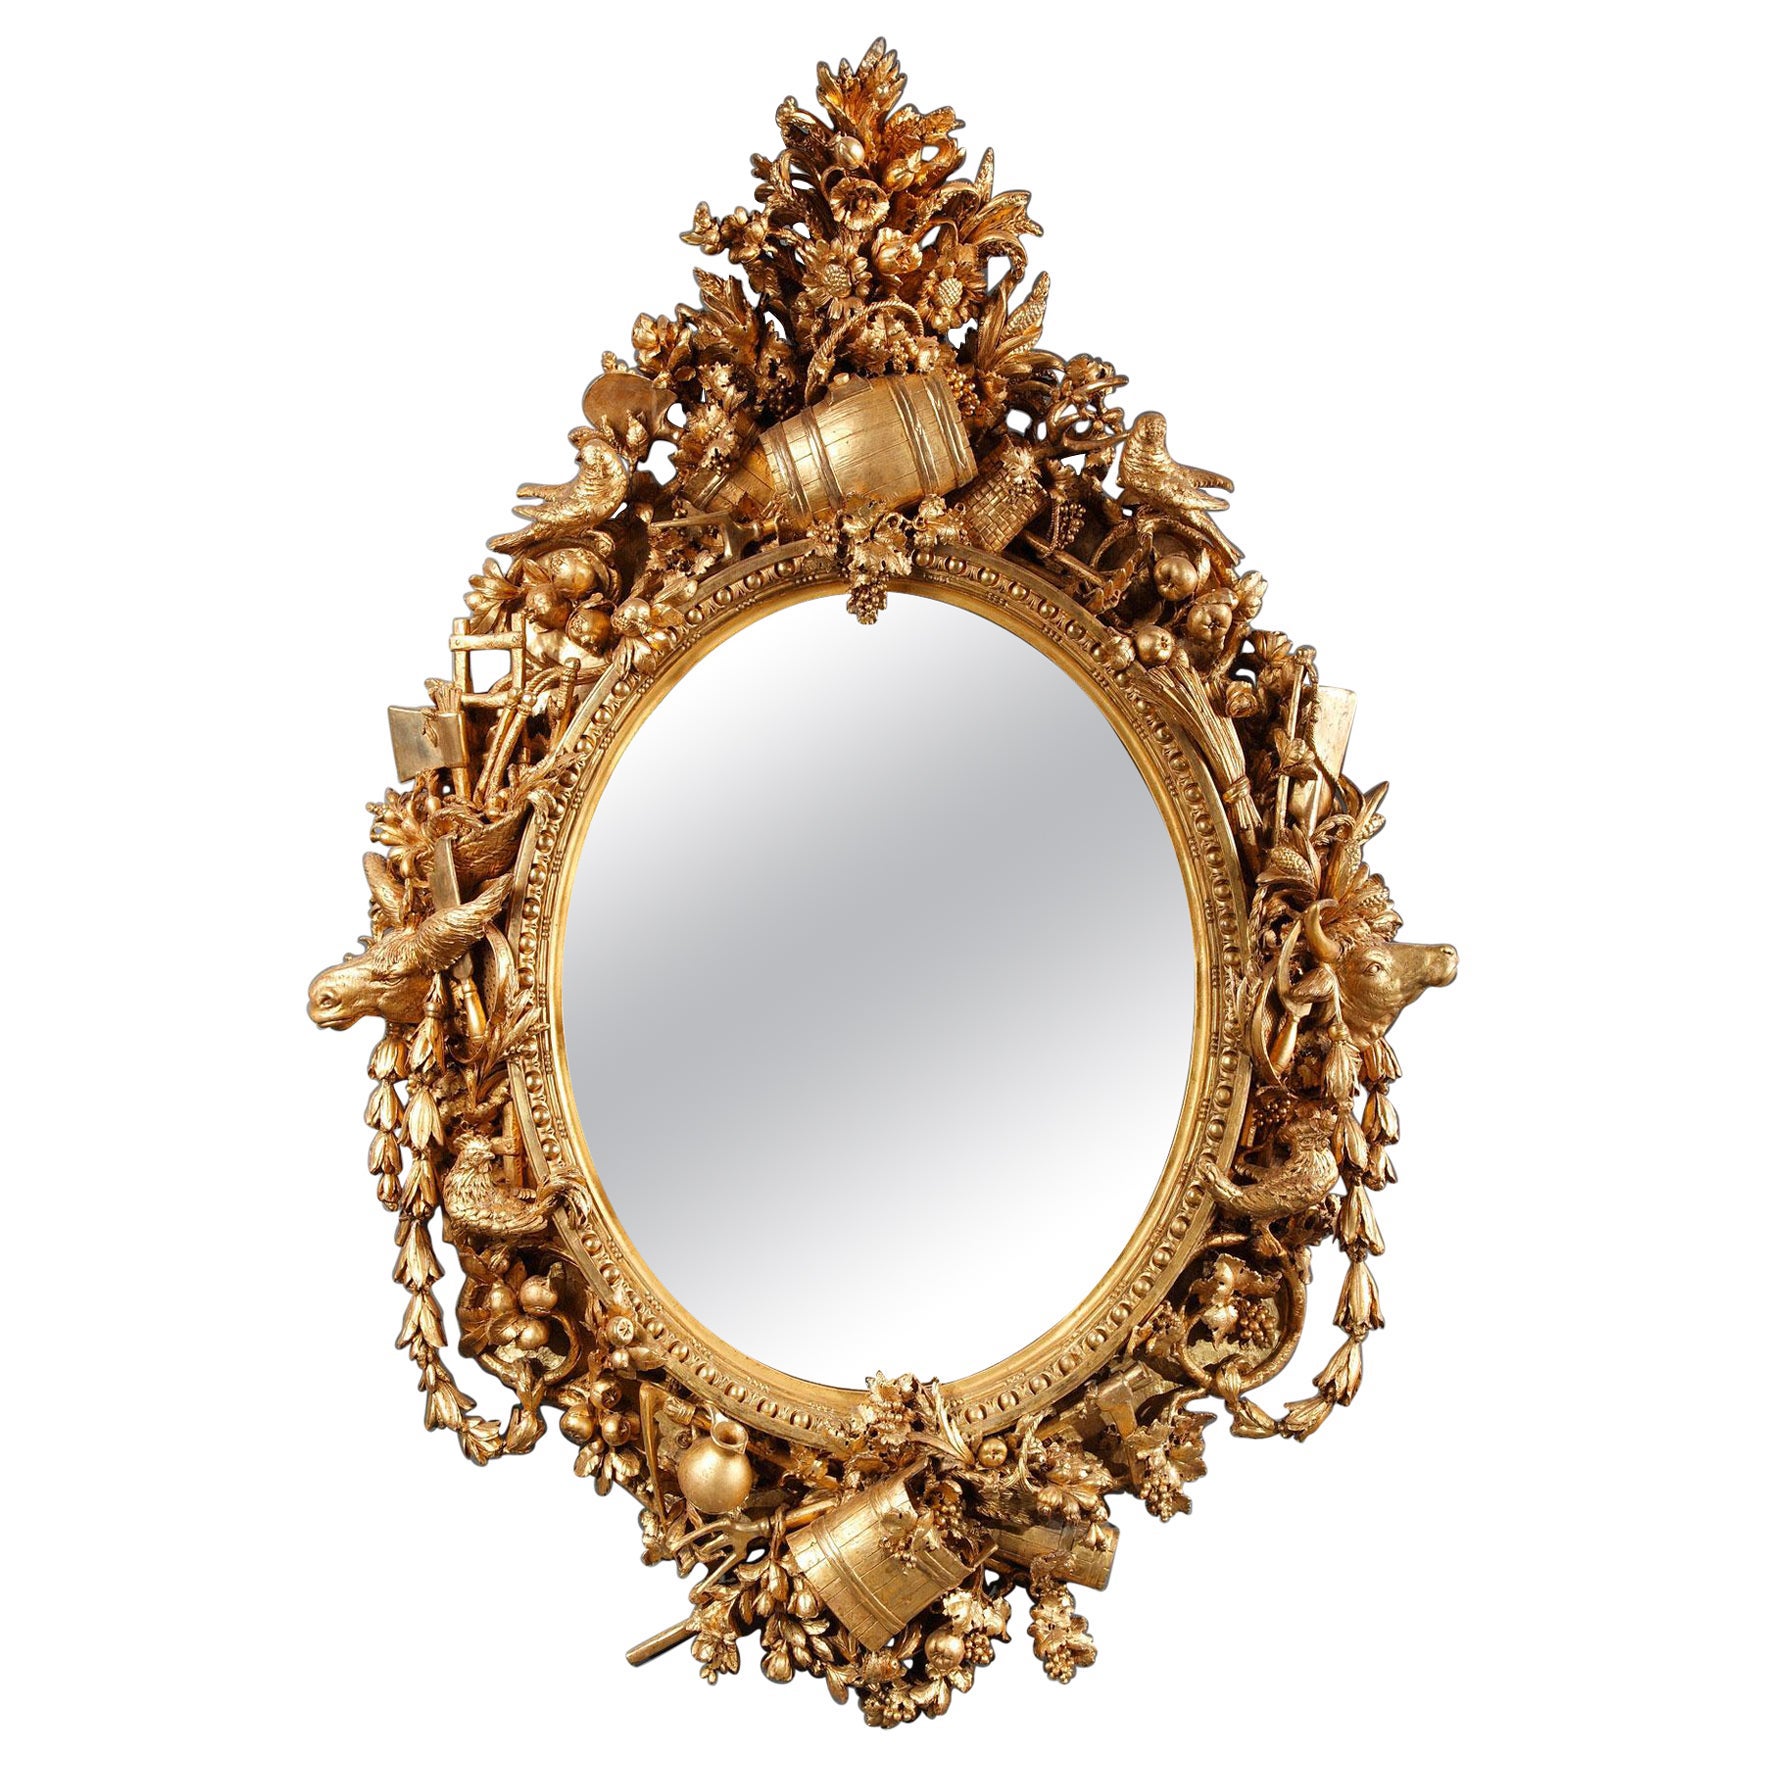 Oval Giltwood Mirror Attributed to L. Frullini, Italy, circa 1890